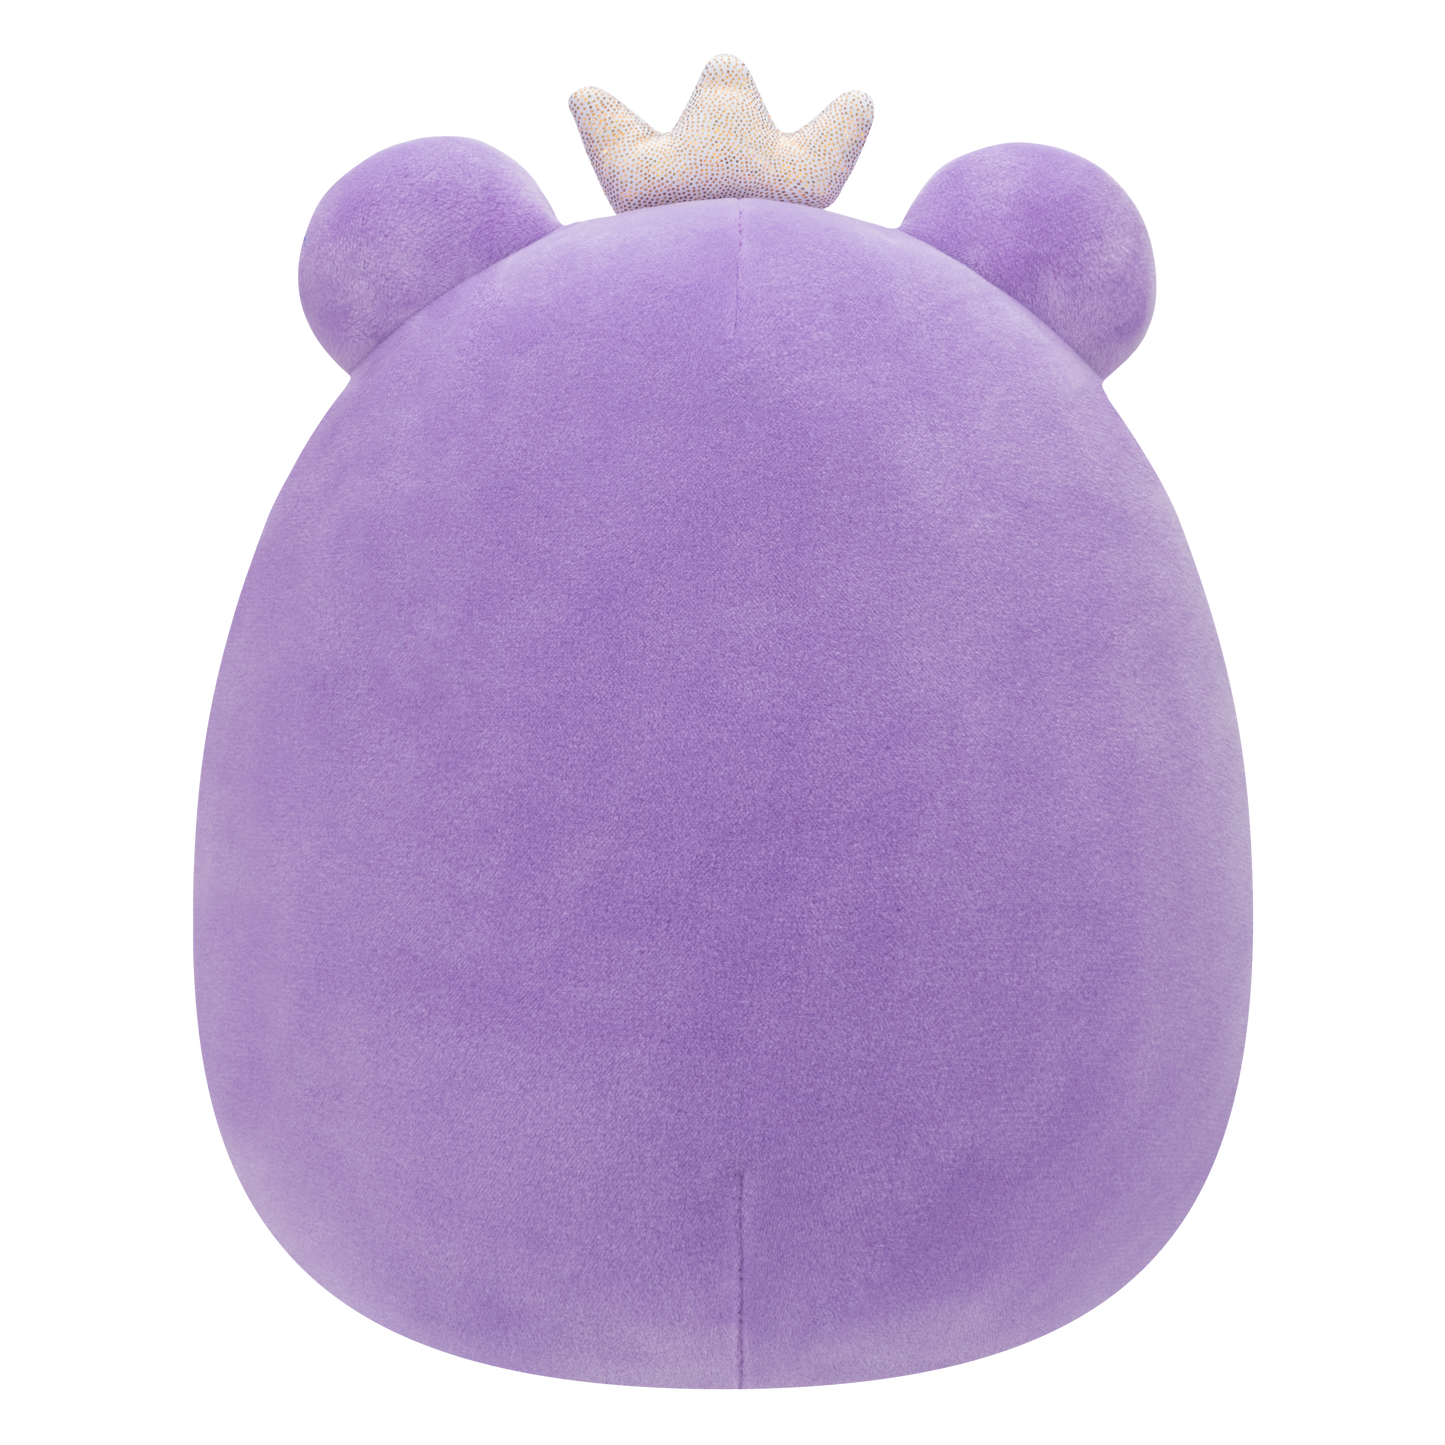 SQUISHMALLOWS 19 CM FRANCINE THE PRUPLE FROG